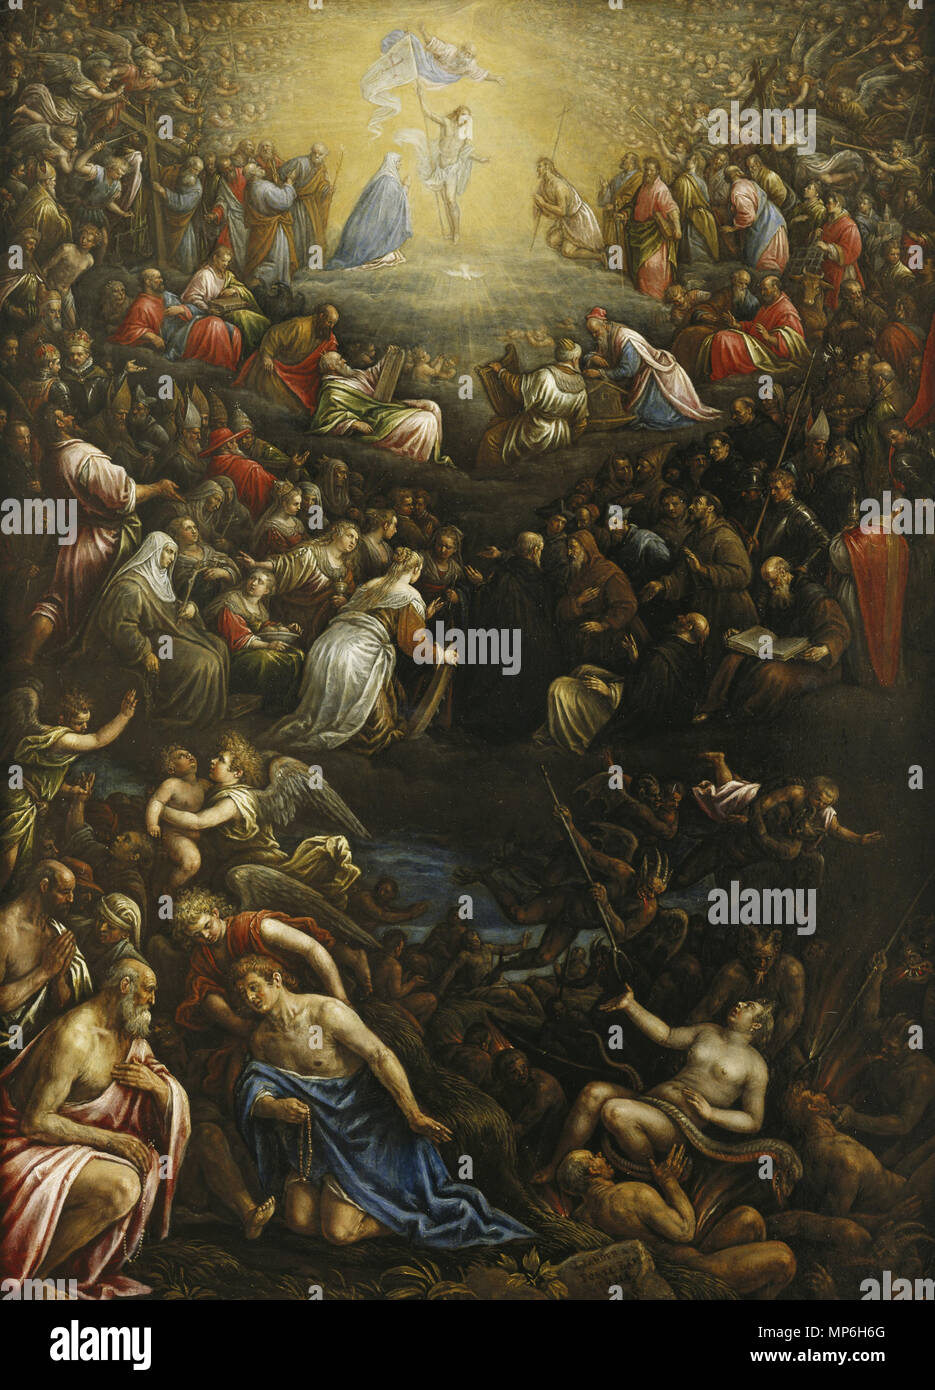 . English: Last Judgment - Leandro dal Ponte, called Leandro Bassano - Google Cultural Institute. Birmingham Museum of Art. 1595/6 - 1605. w19 x h28 IN. Oil on copper. circa 1595-1605.   Leandro Bassano  (1557–1622)     Alternative names Leandro da Ponte  Description Italian painter younger brother of Francesco Bassano the Younger and third son of Jacopo Bassano  Date of birth/death 10 June 1557 15 April 1622  Location of birth/death Bassano del Grappa Venice  Work period Manierism  Work location Vienna, Venice, Bassano del Grappa  Authority control  : Q1349666 VIAF: 22414872 ISNI: 0000 0001 1 Stock Photo